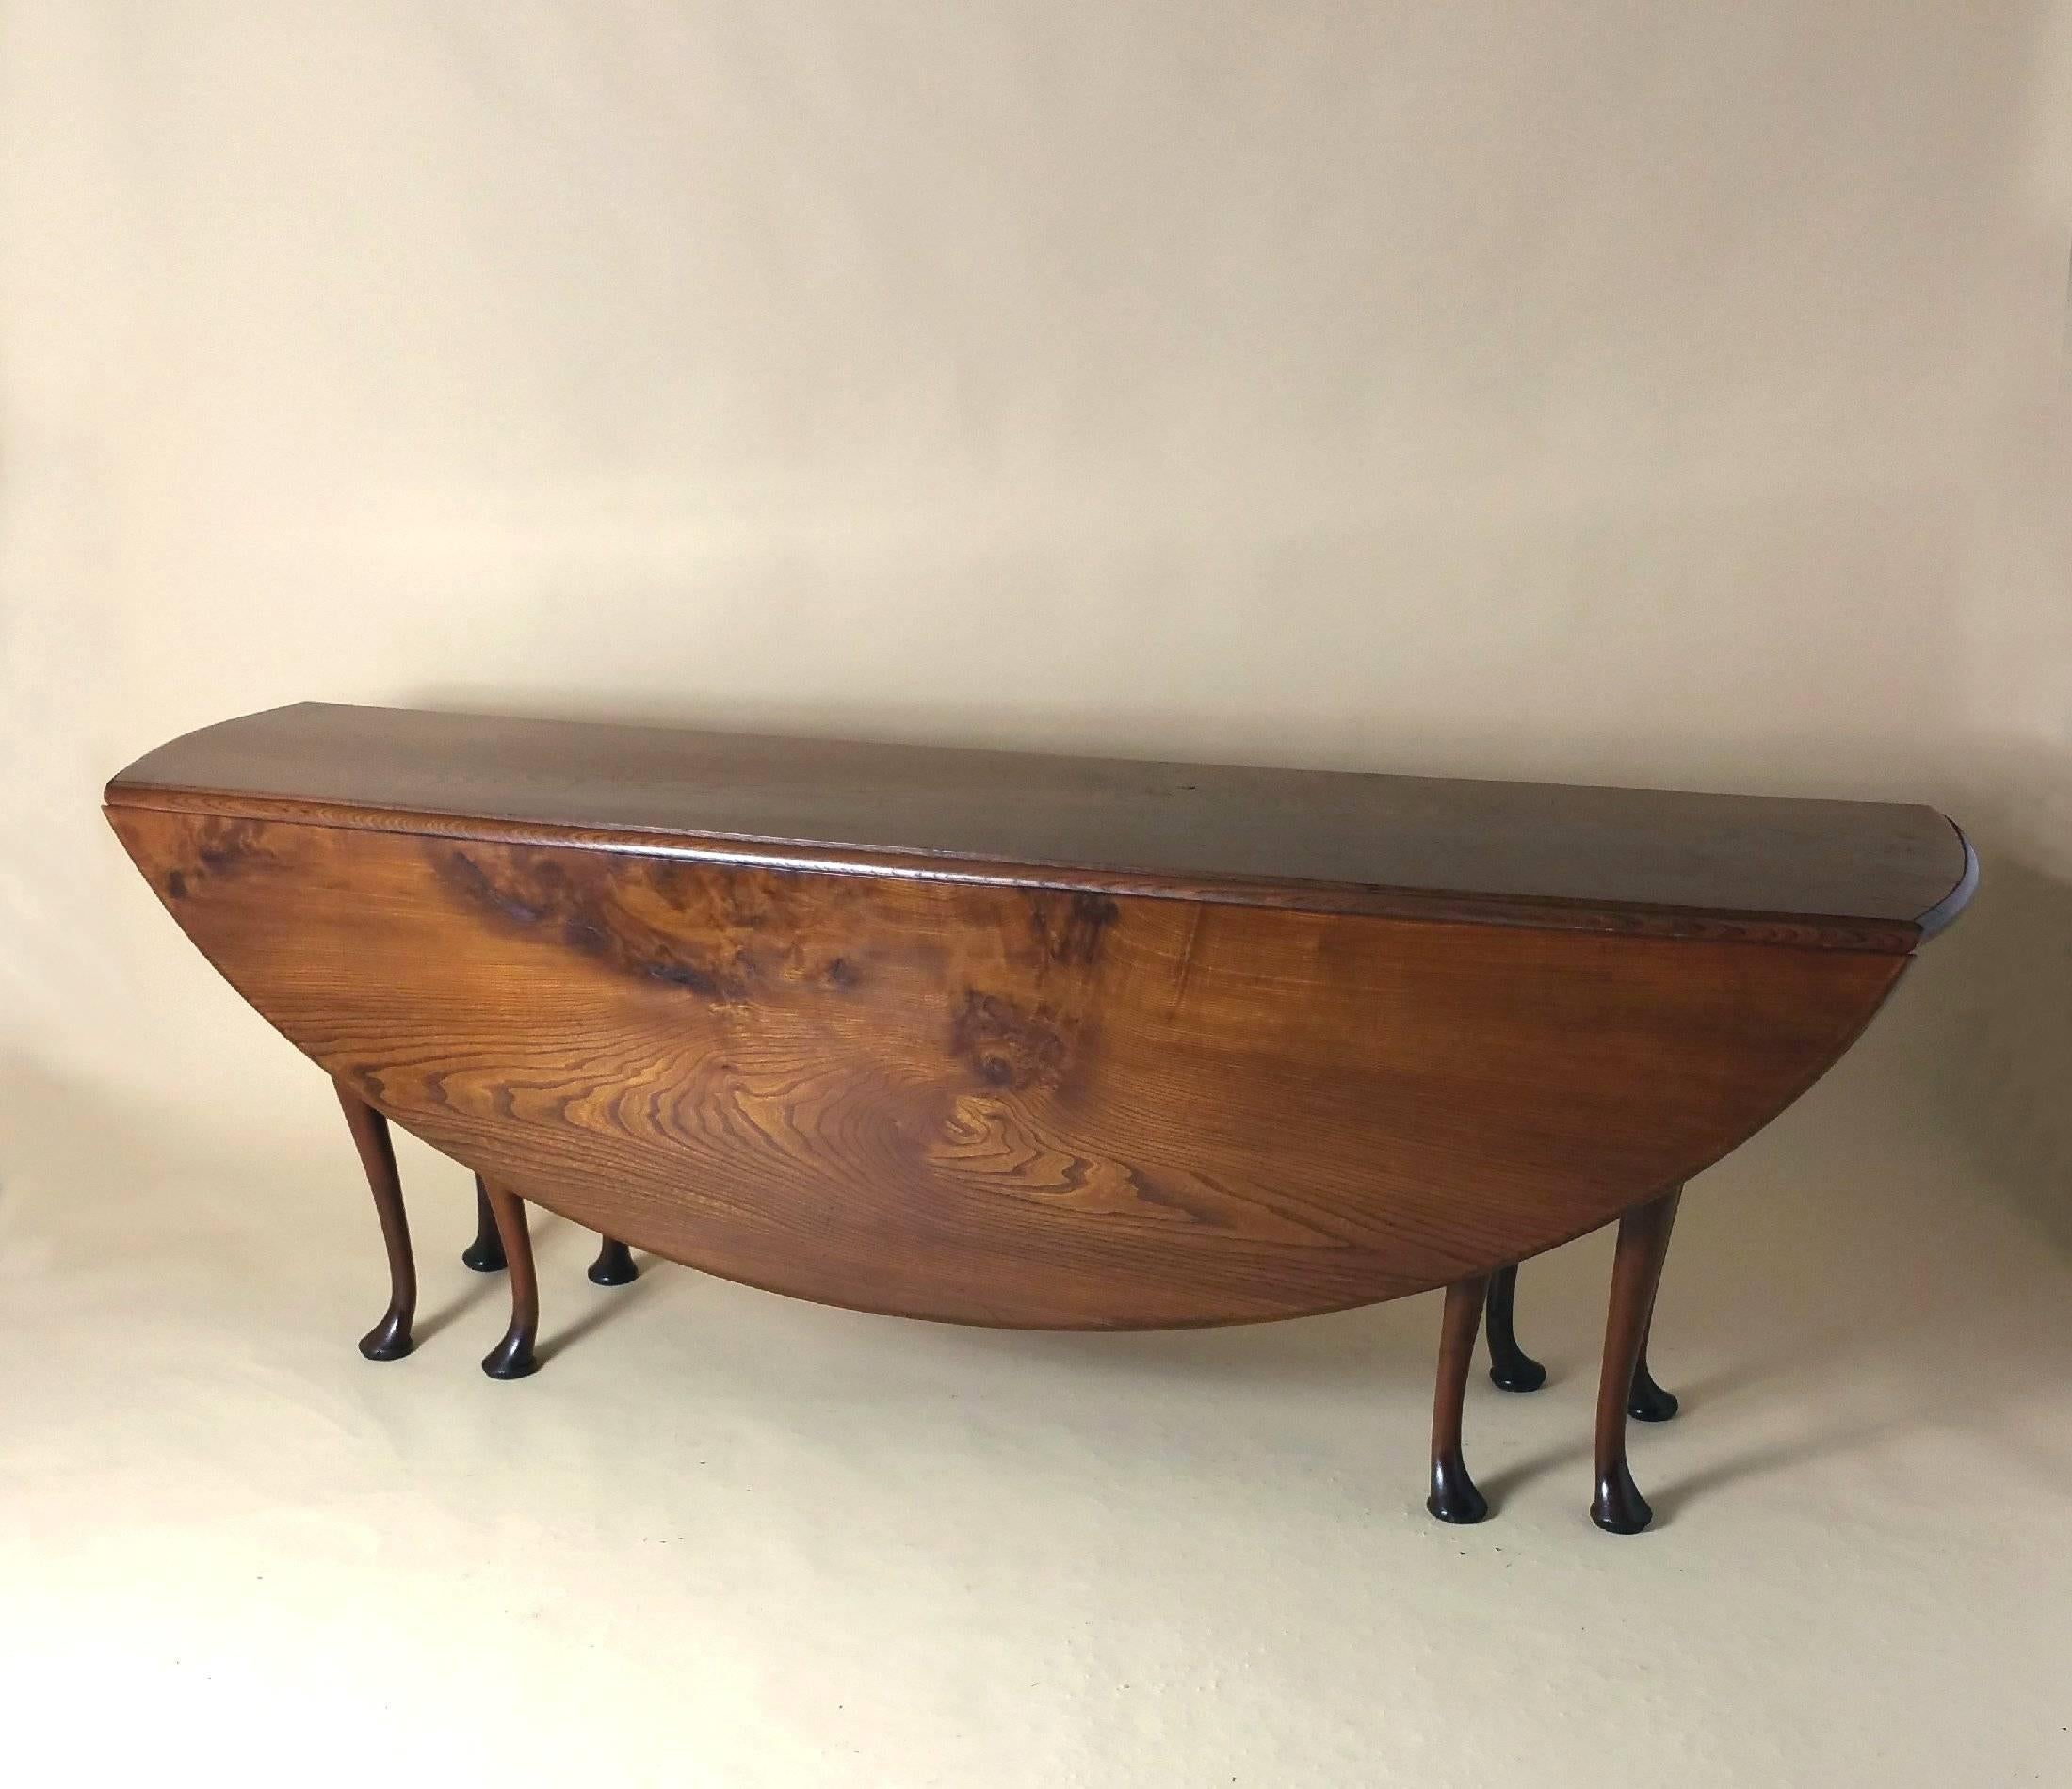 This splendid and solid mid-20th century drop-leaf wake table is made from pollard Elm, and is supported by eight yewwood cabriole legs. The table opens up to a more unusual long oval shape, which would accommodate eight-ten people. It measures 84